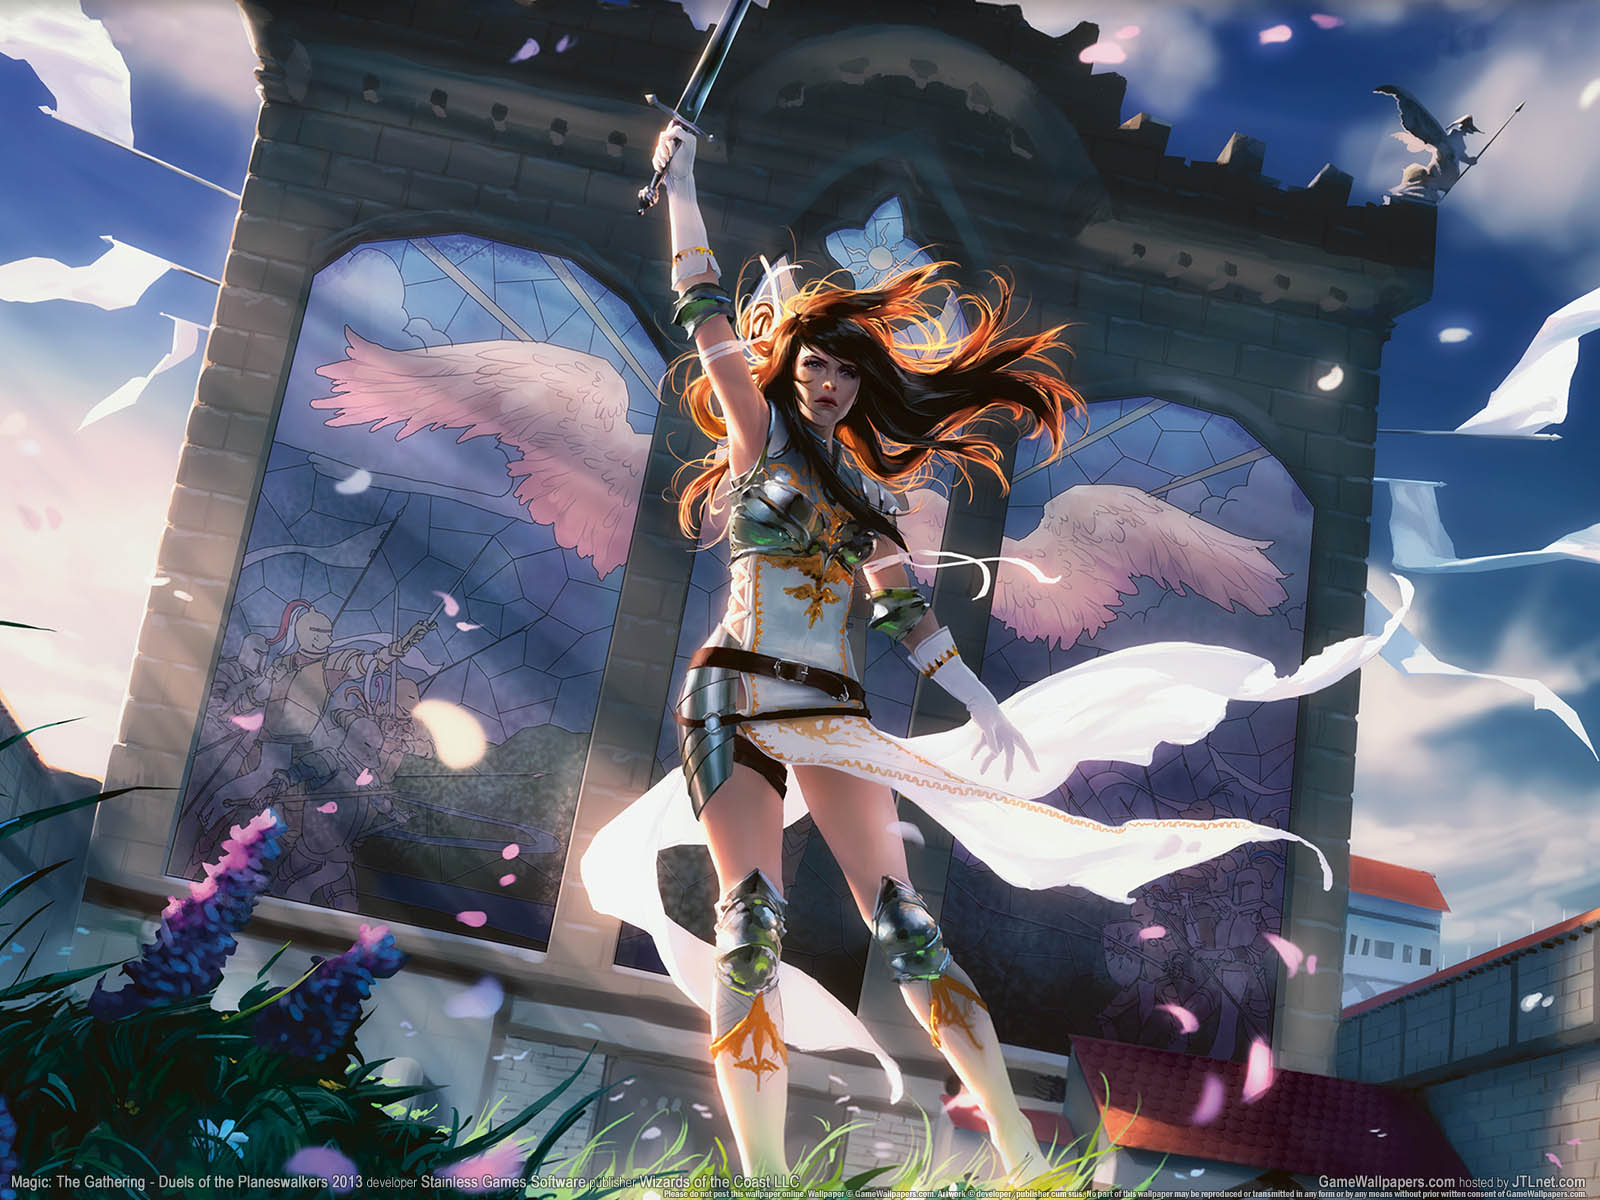 Magic%253A The Gathering - Duels of the Planeswalkers 2013 wallpaper 01 1600x1200